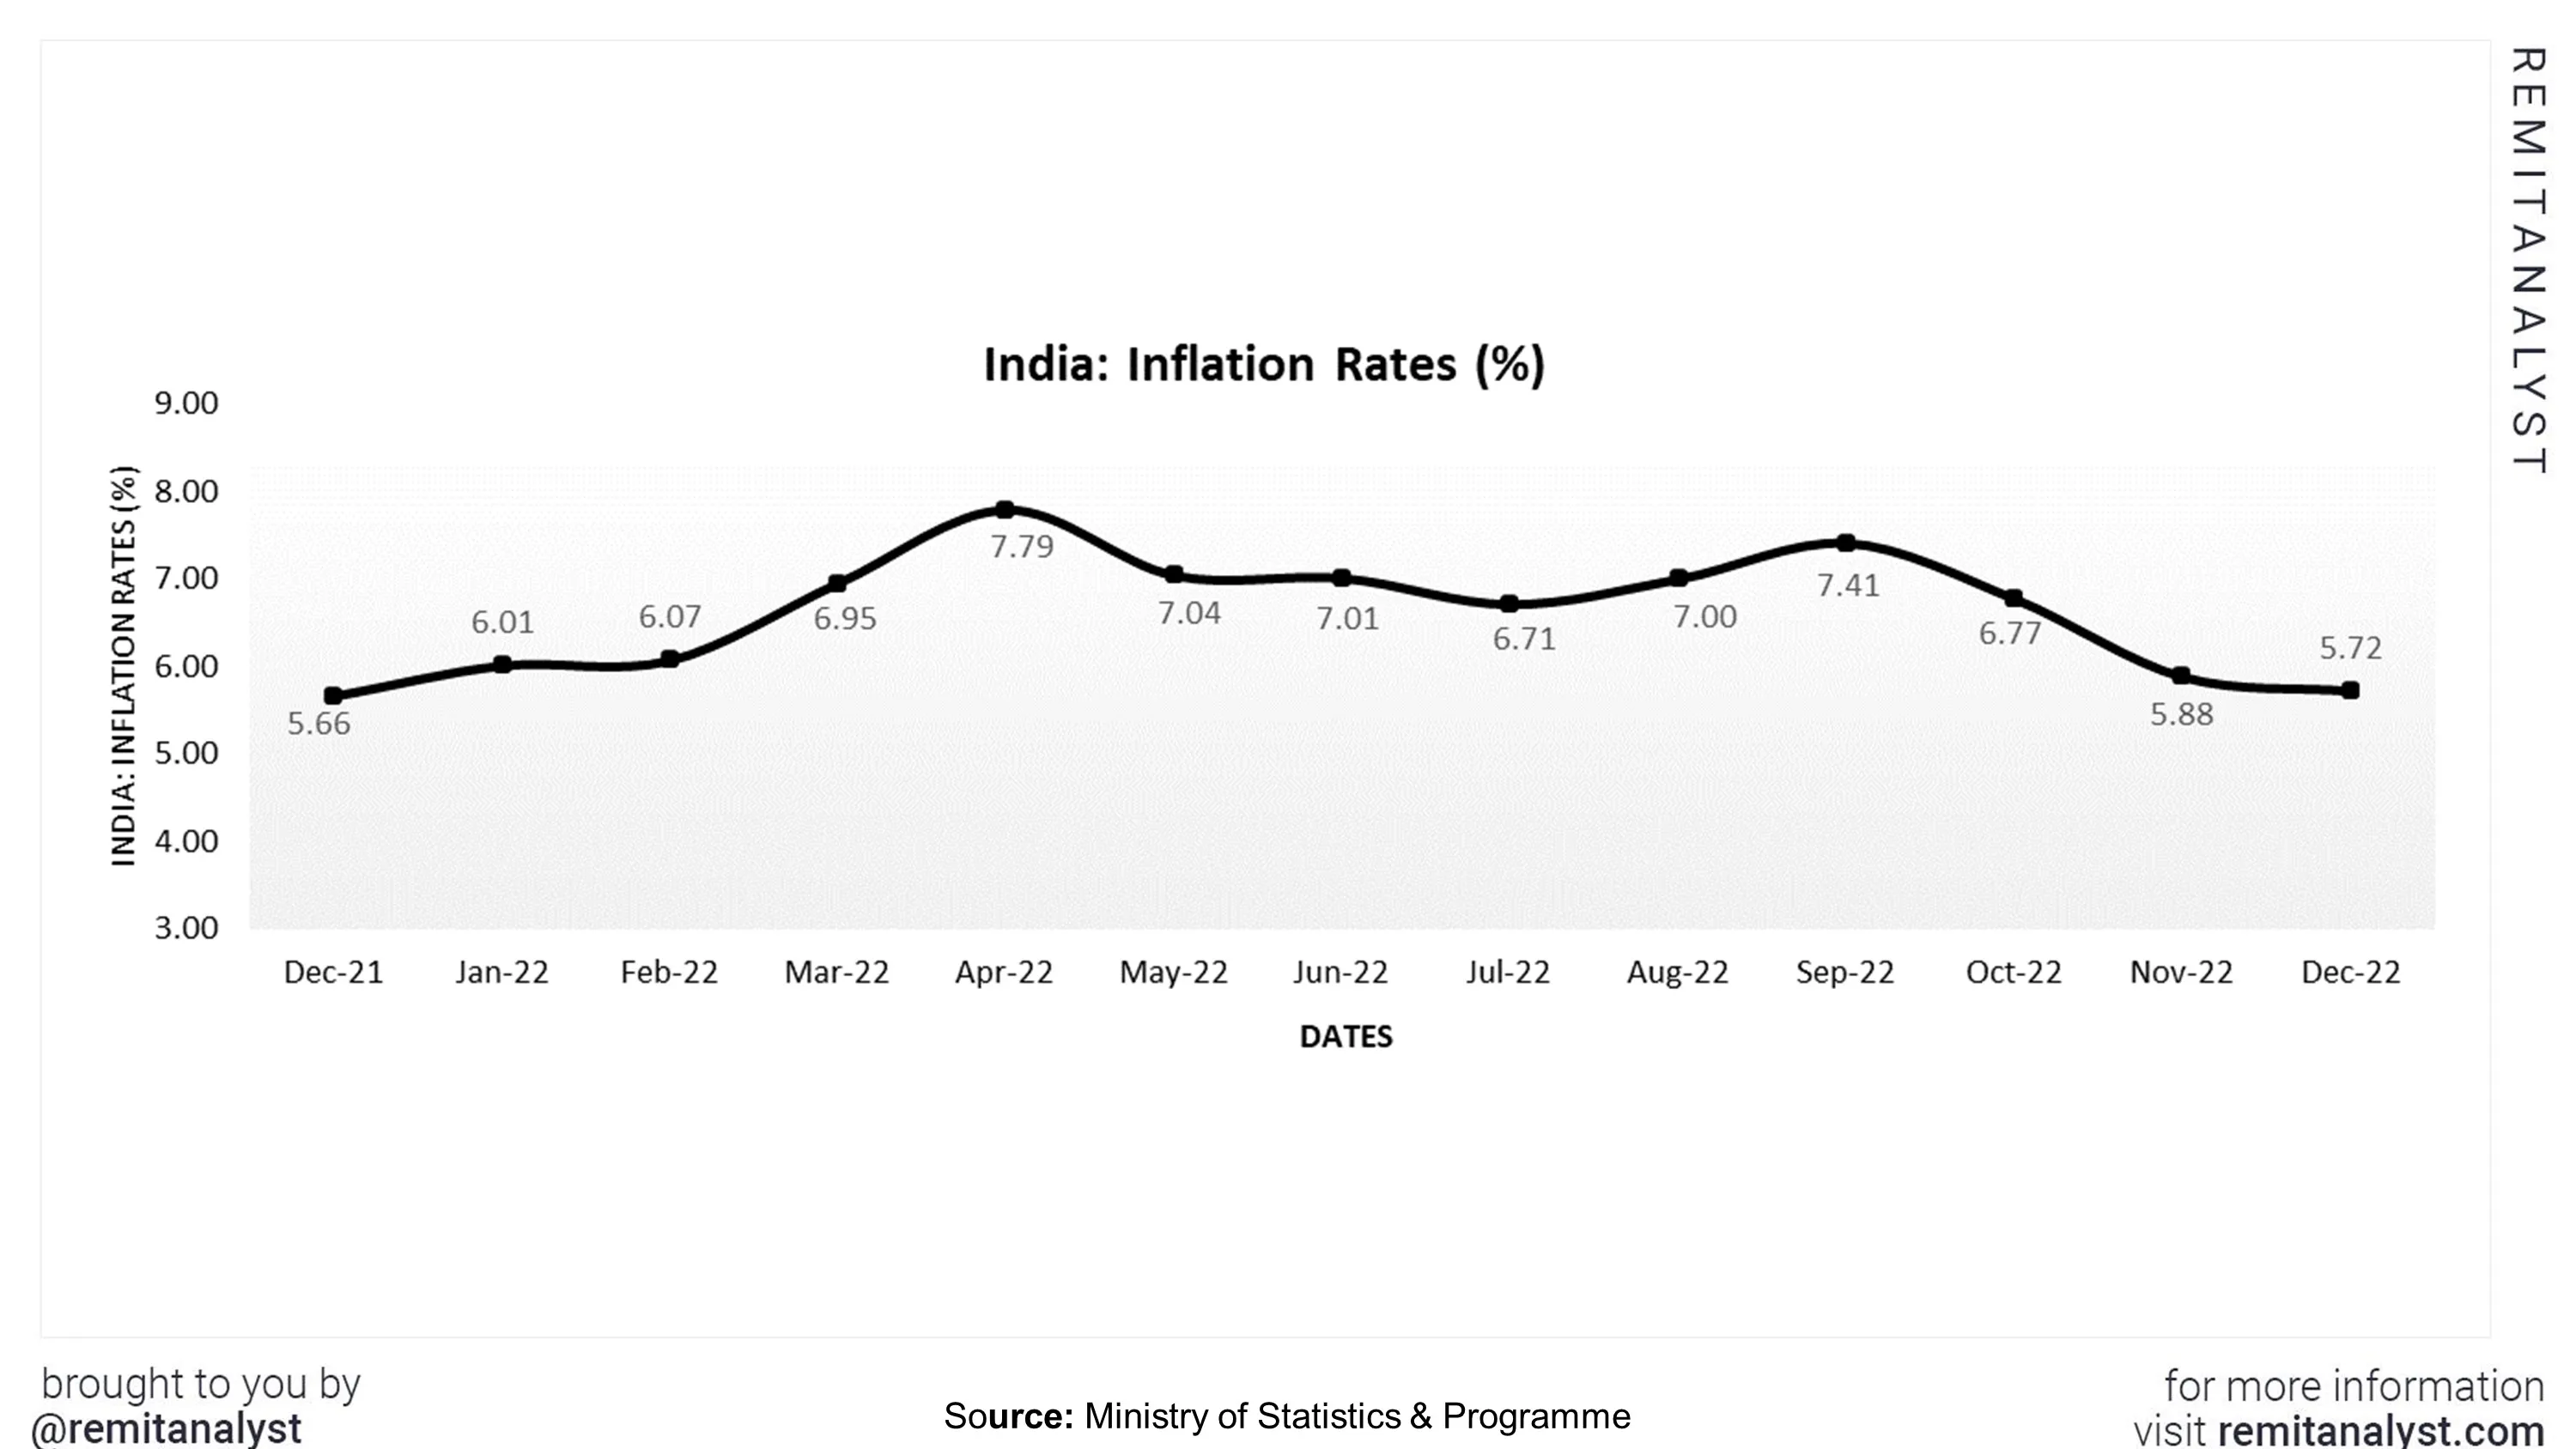 inflation-rates-india-from-dec-2021-to-dec-2022